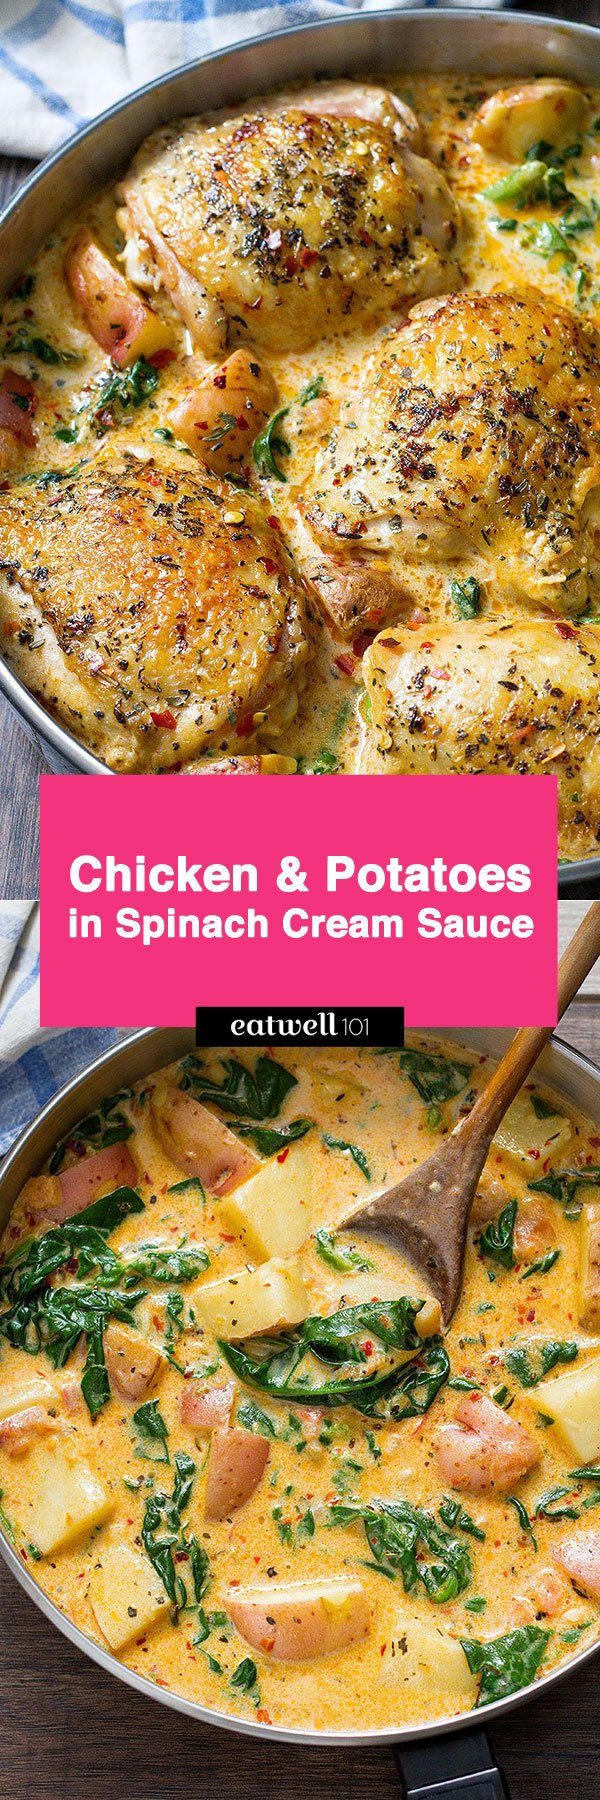 One Pan Chicken and Potatoes with #spinach Garlic Parmesan Cream Sauce  – #eatwell101 #recipe  Amazing flavors in just one skillet! The tastiest #Chicken and #Potatoes #dinner with #spinach #Garlic #Parmesan #Cream Sauce for any night of the week!